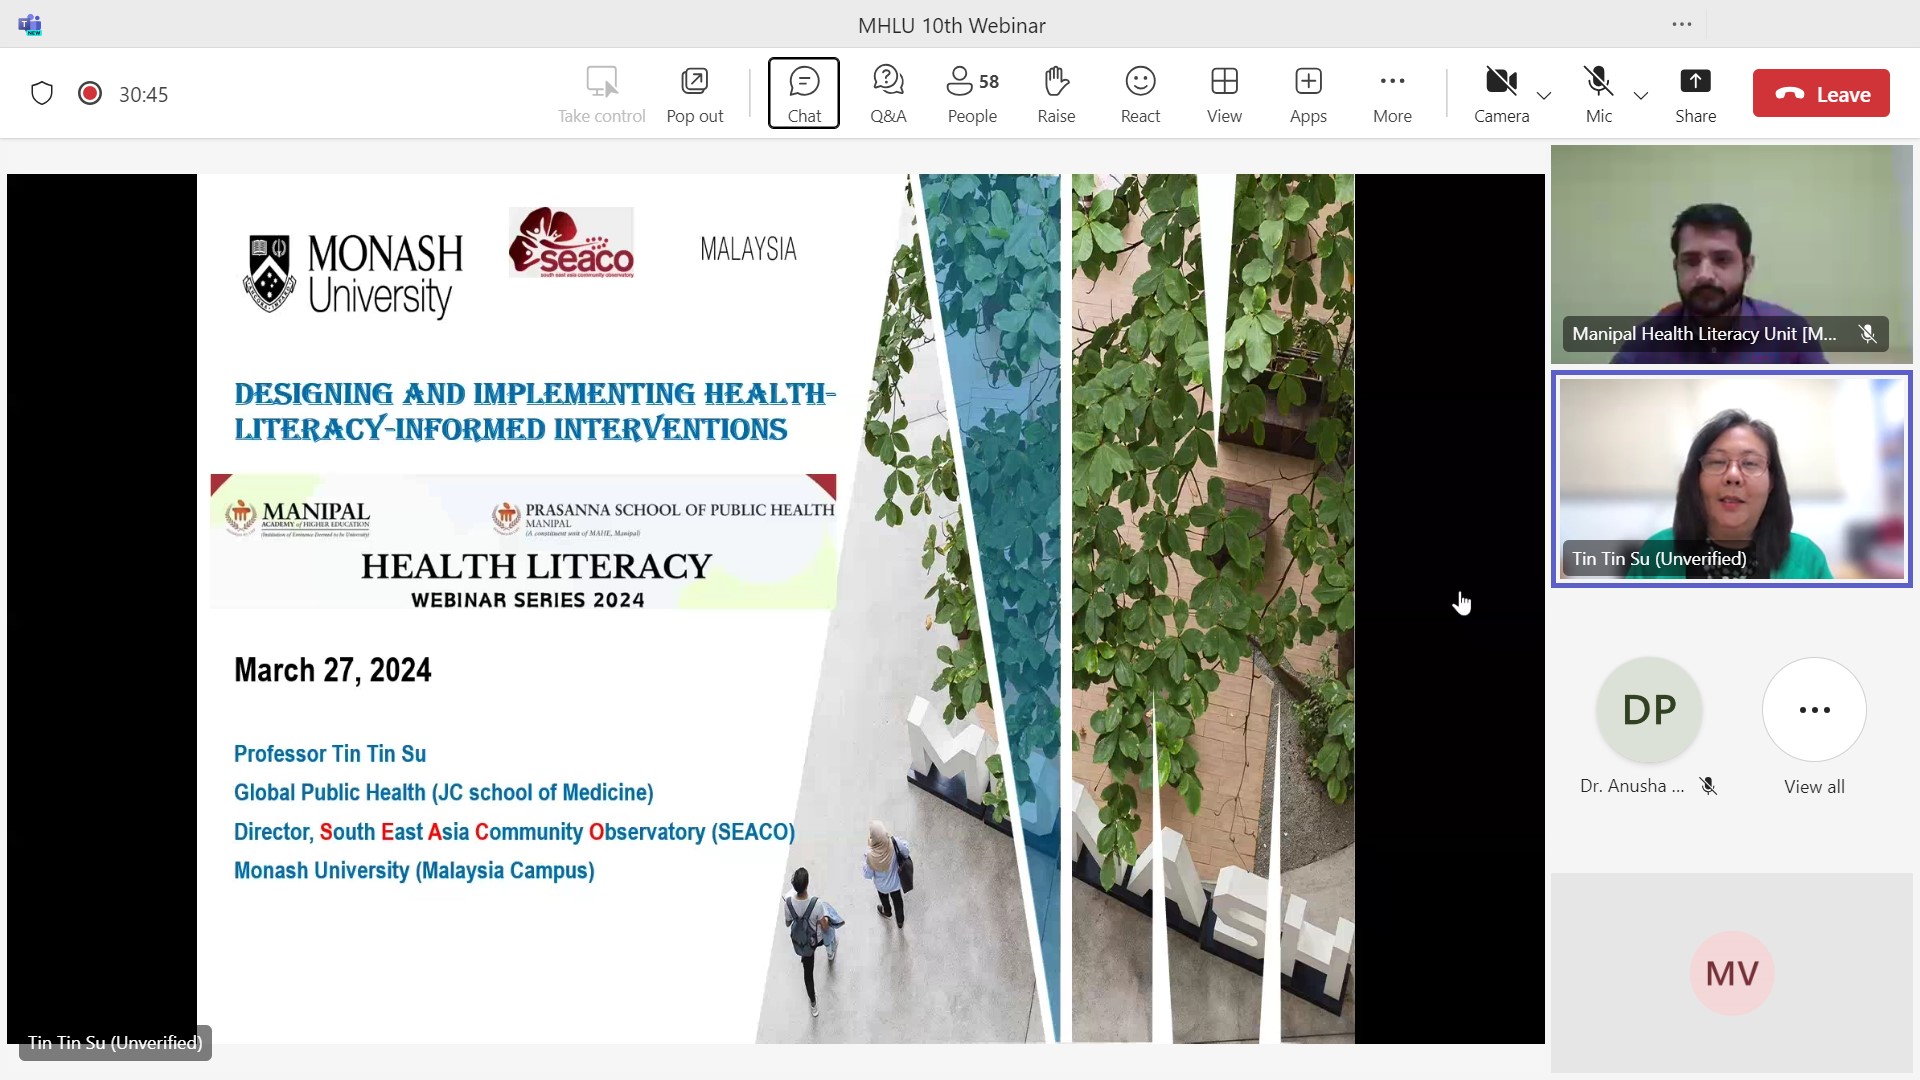 Manipal Health Literacy Unit Webinar Series – Tenth Health Literacy Webinar – "A Data-Analytic Roadmap to Health Literacy Assessments and Health Literacy-Informed Interventions for Population Health”: March 27, 2024